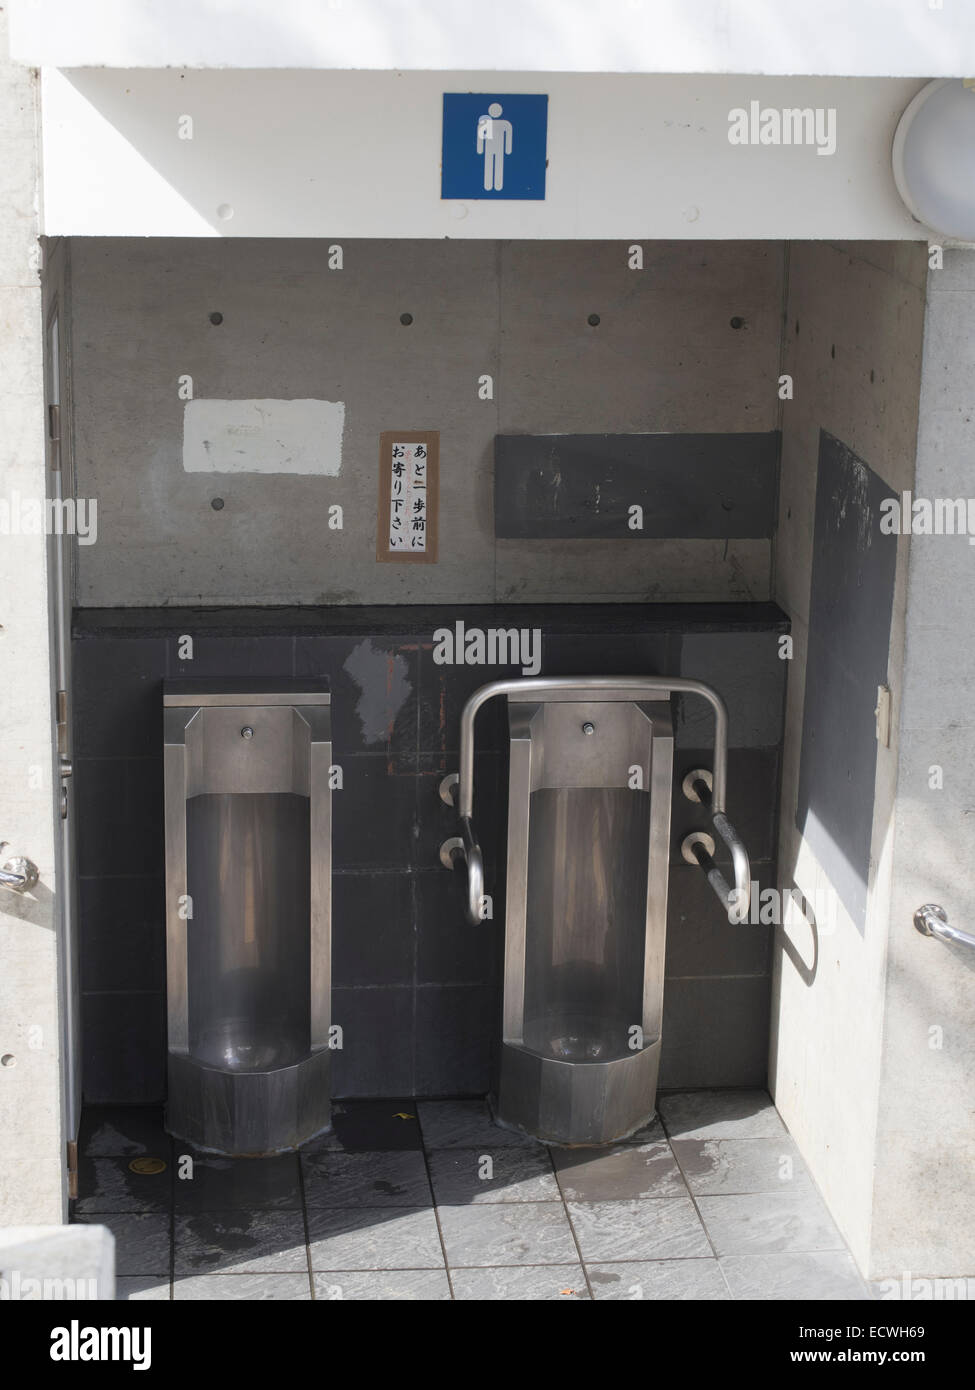 Outdoor toilets / urinals that are open to public view on the street in Naha City, Okinawa, Japan Stock Photo